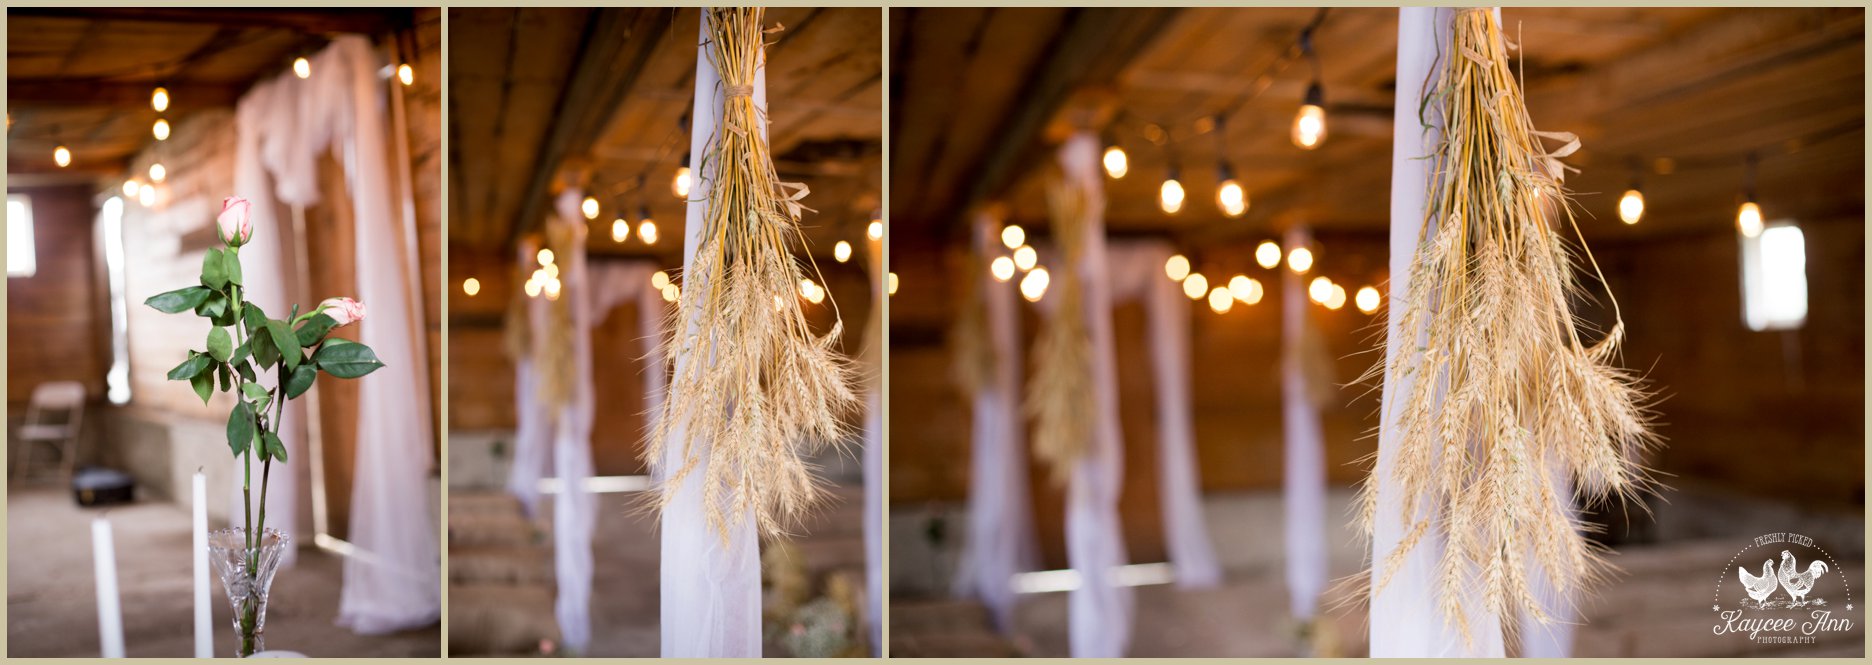 wheat, decor, country decor, diy, rustic, barn, twinkle lights, hay bale, rose, traditional, antique, vase, rose